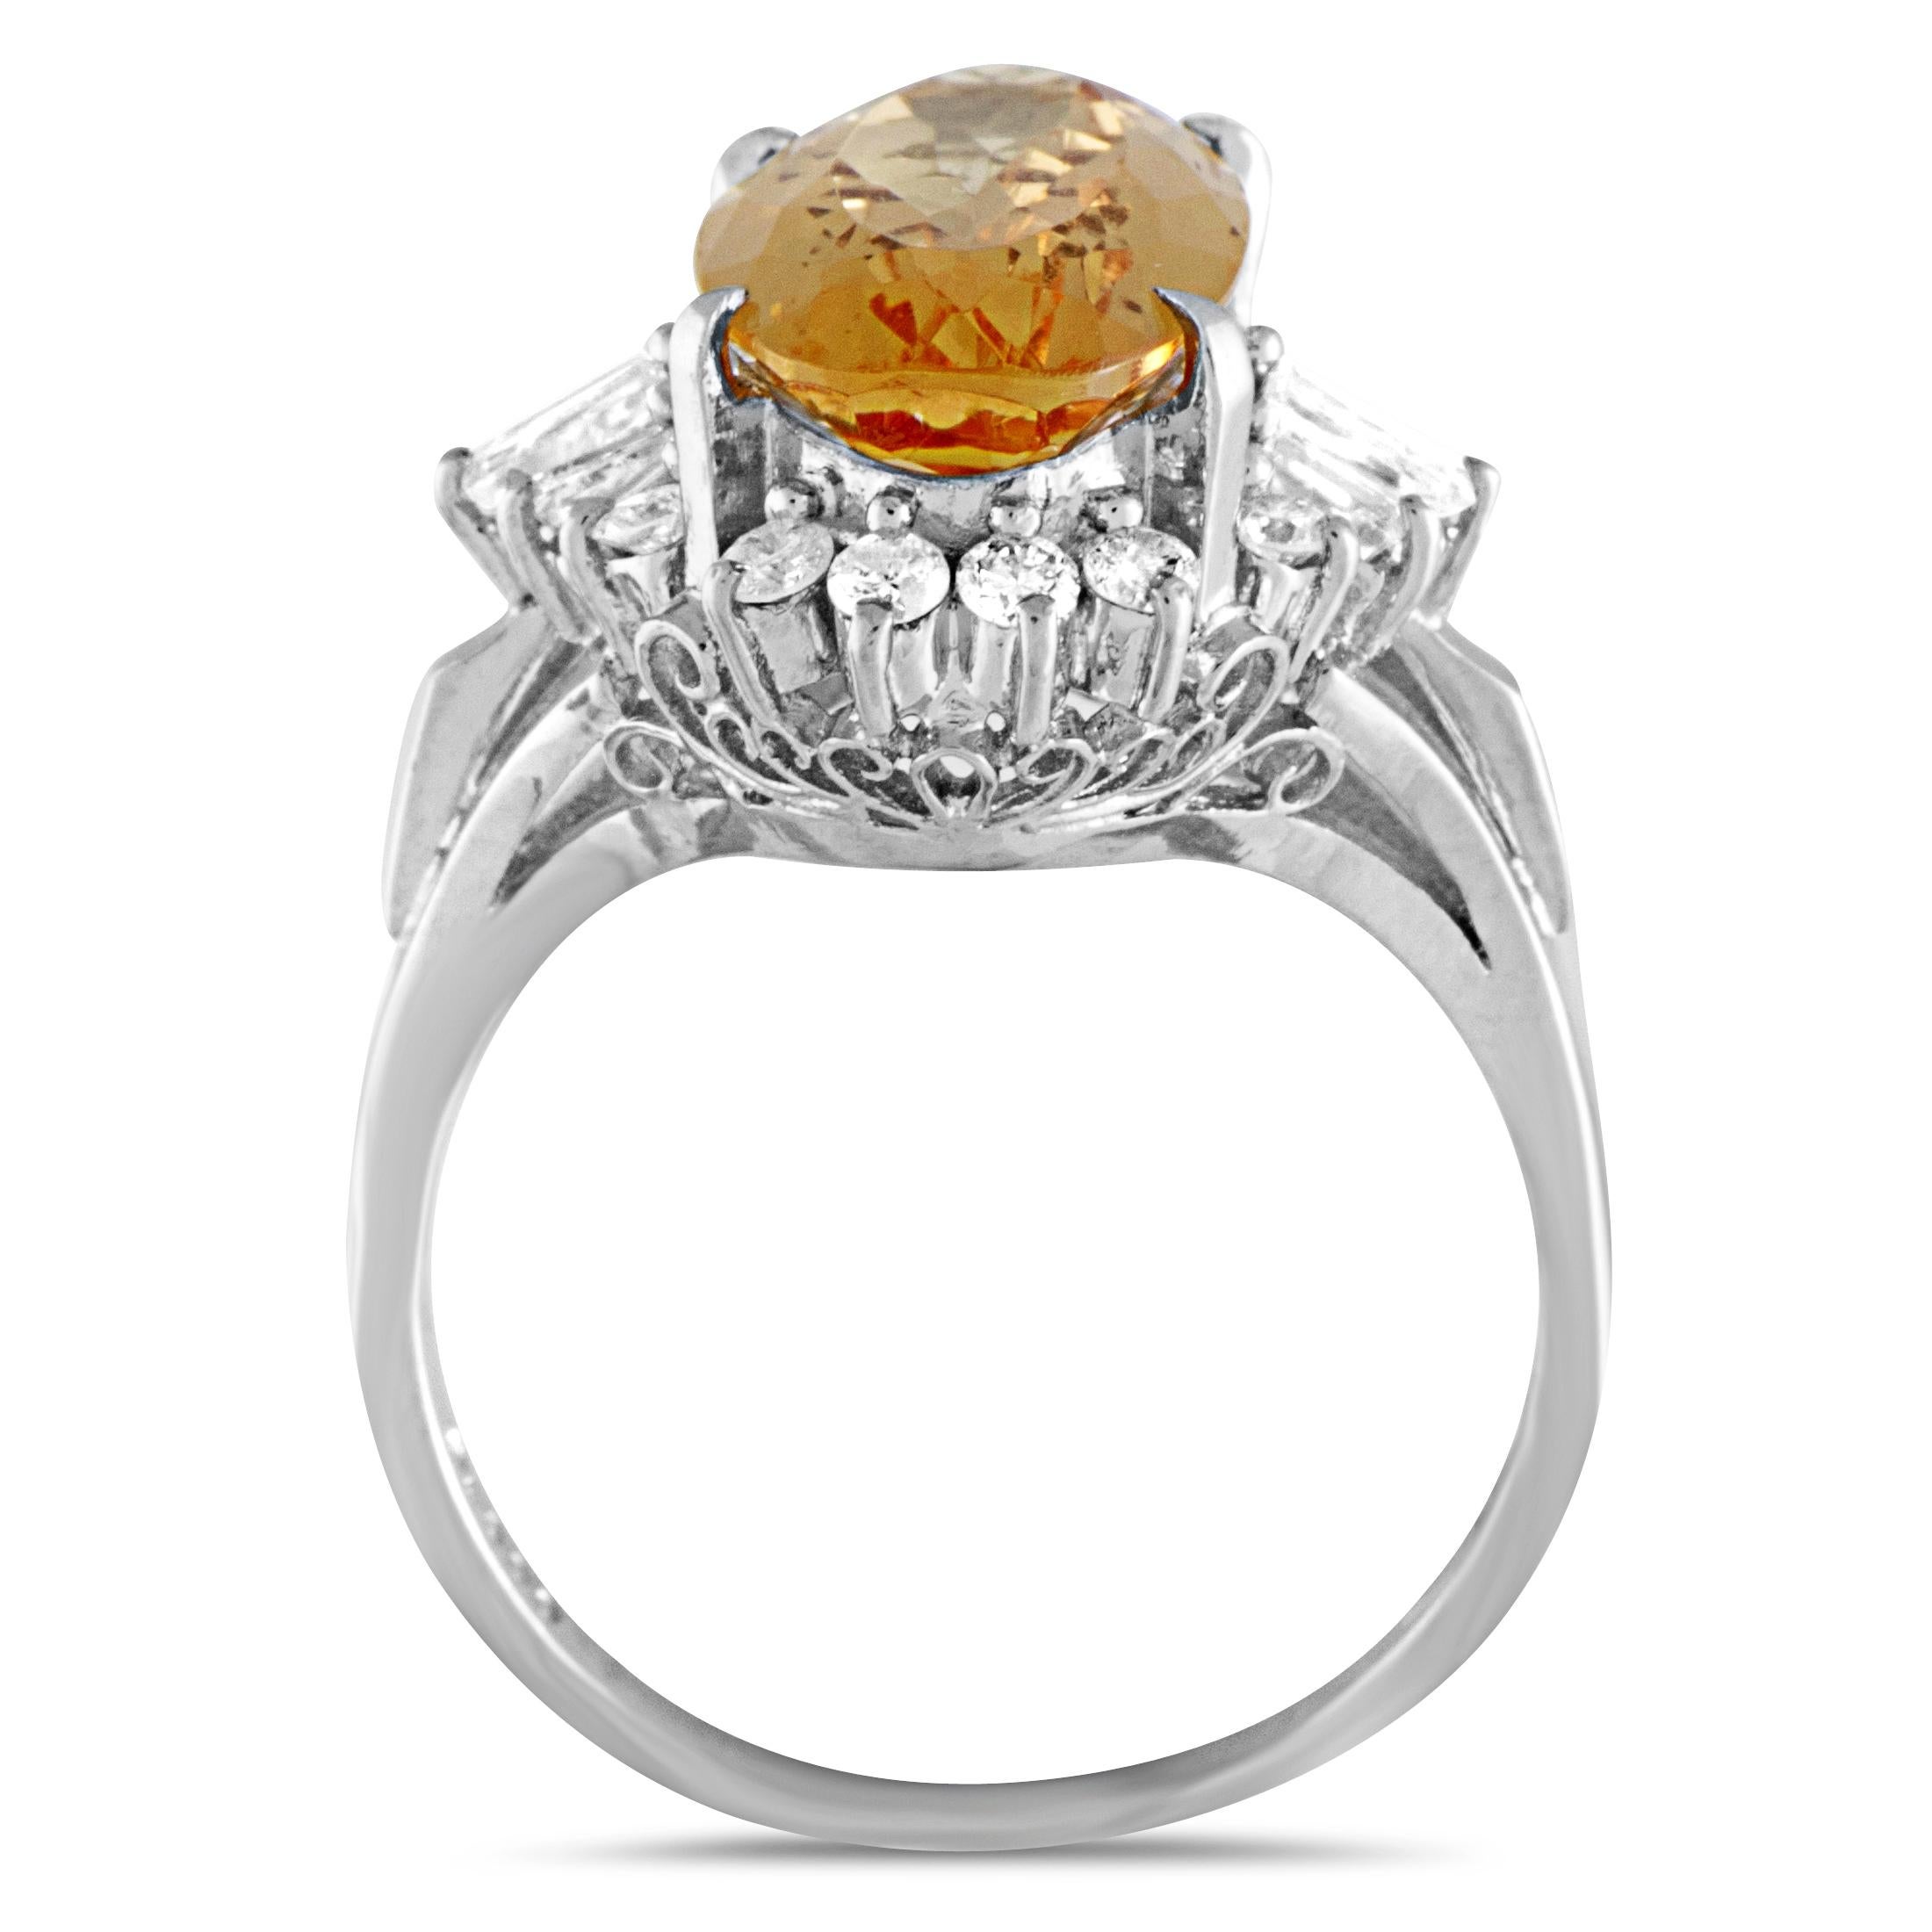 A sparkling boundary of resplendent diamonds, weighing 0.57carats, glamorously accentuates the beautiful orange topaz, weighing 4.62 carats, in this exuberant ring that is expertly crafted from luxurious platinum.
Ring Top Dimensions: 16mm x16mm